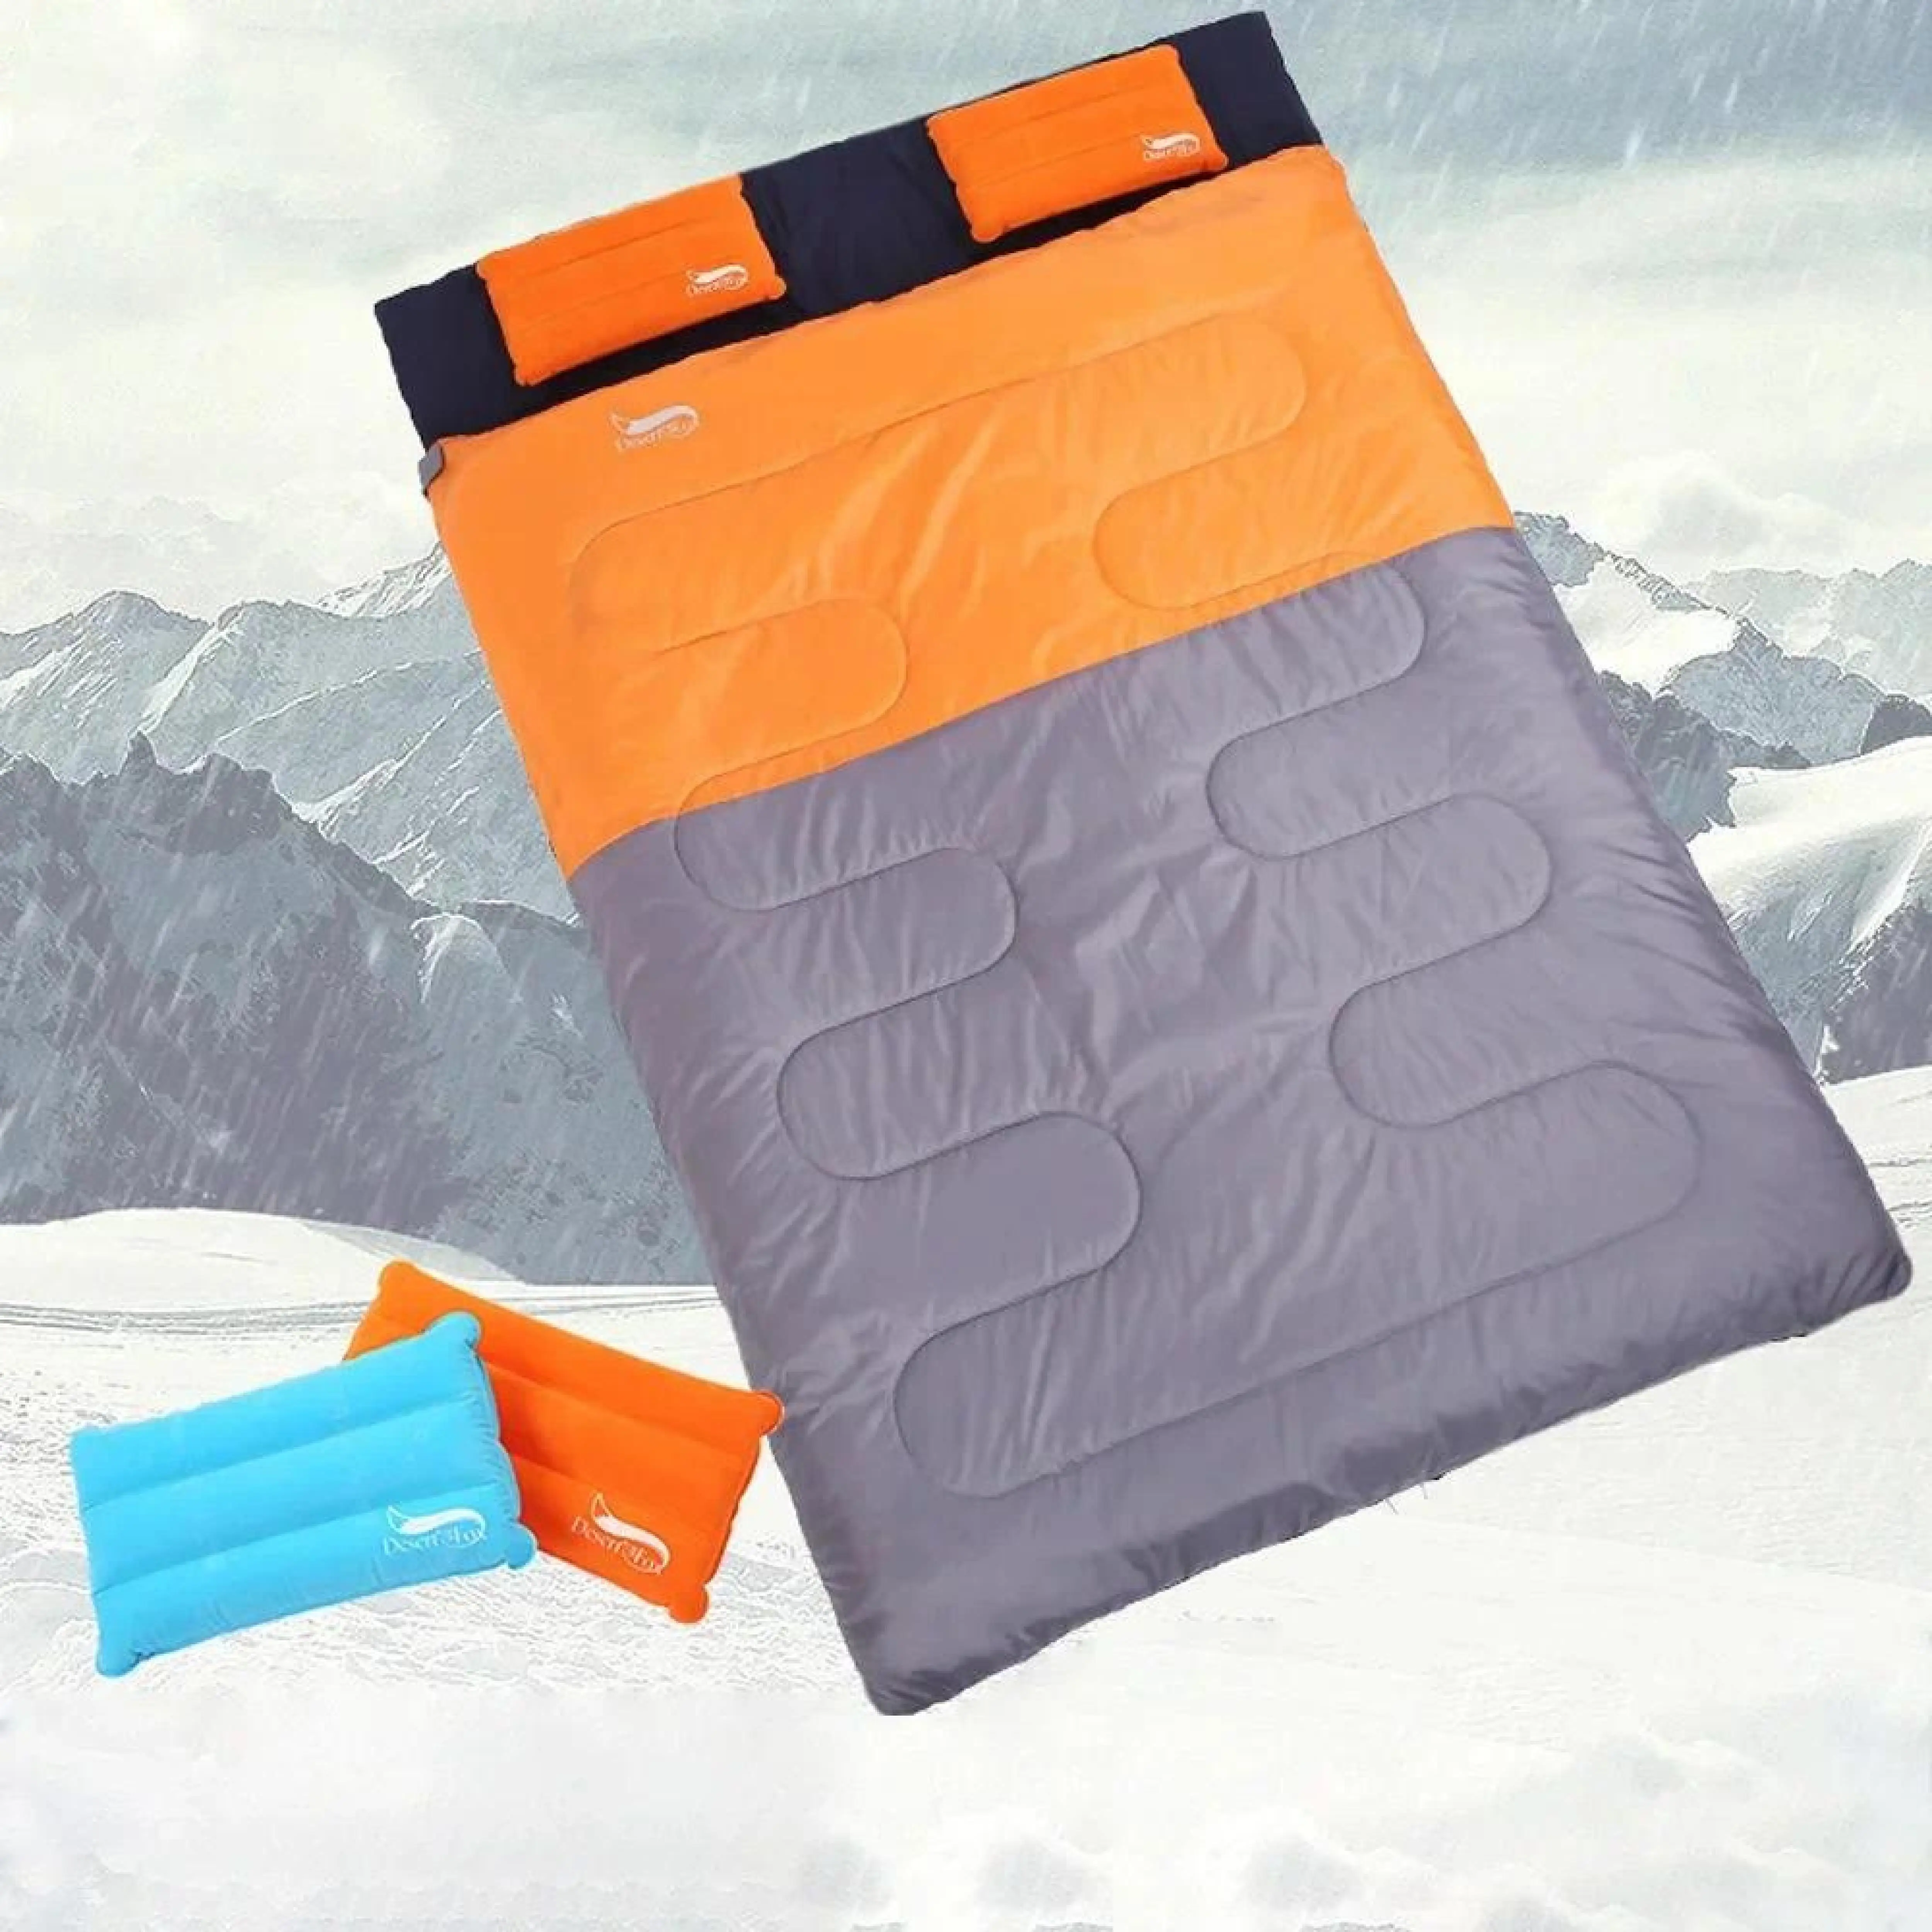 

Camping Tent Outdoor Double Sleeping Bag Camping Single Sleeping Bag 2 in 1 with 2 Pillows for Backpacking Hiking Climbing